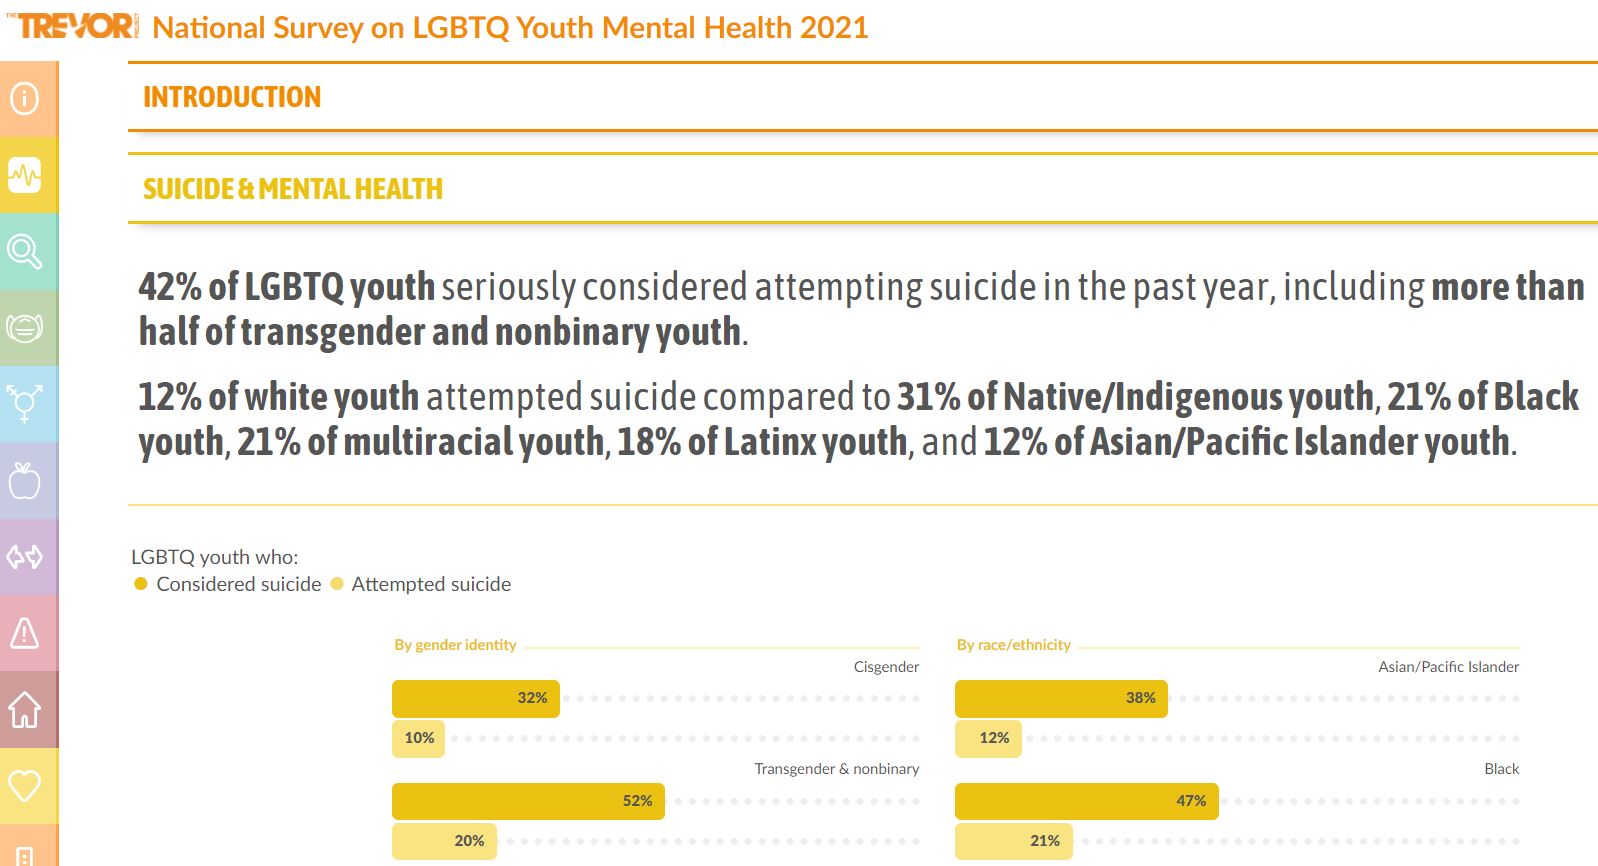 The Trevor Project: National Survey on LGBTQ Youth Mental Health 2021